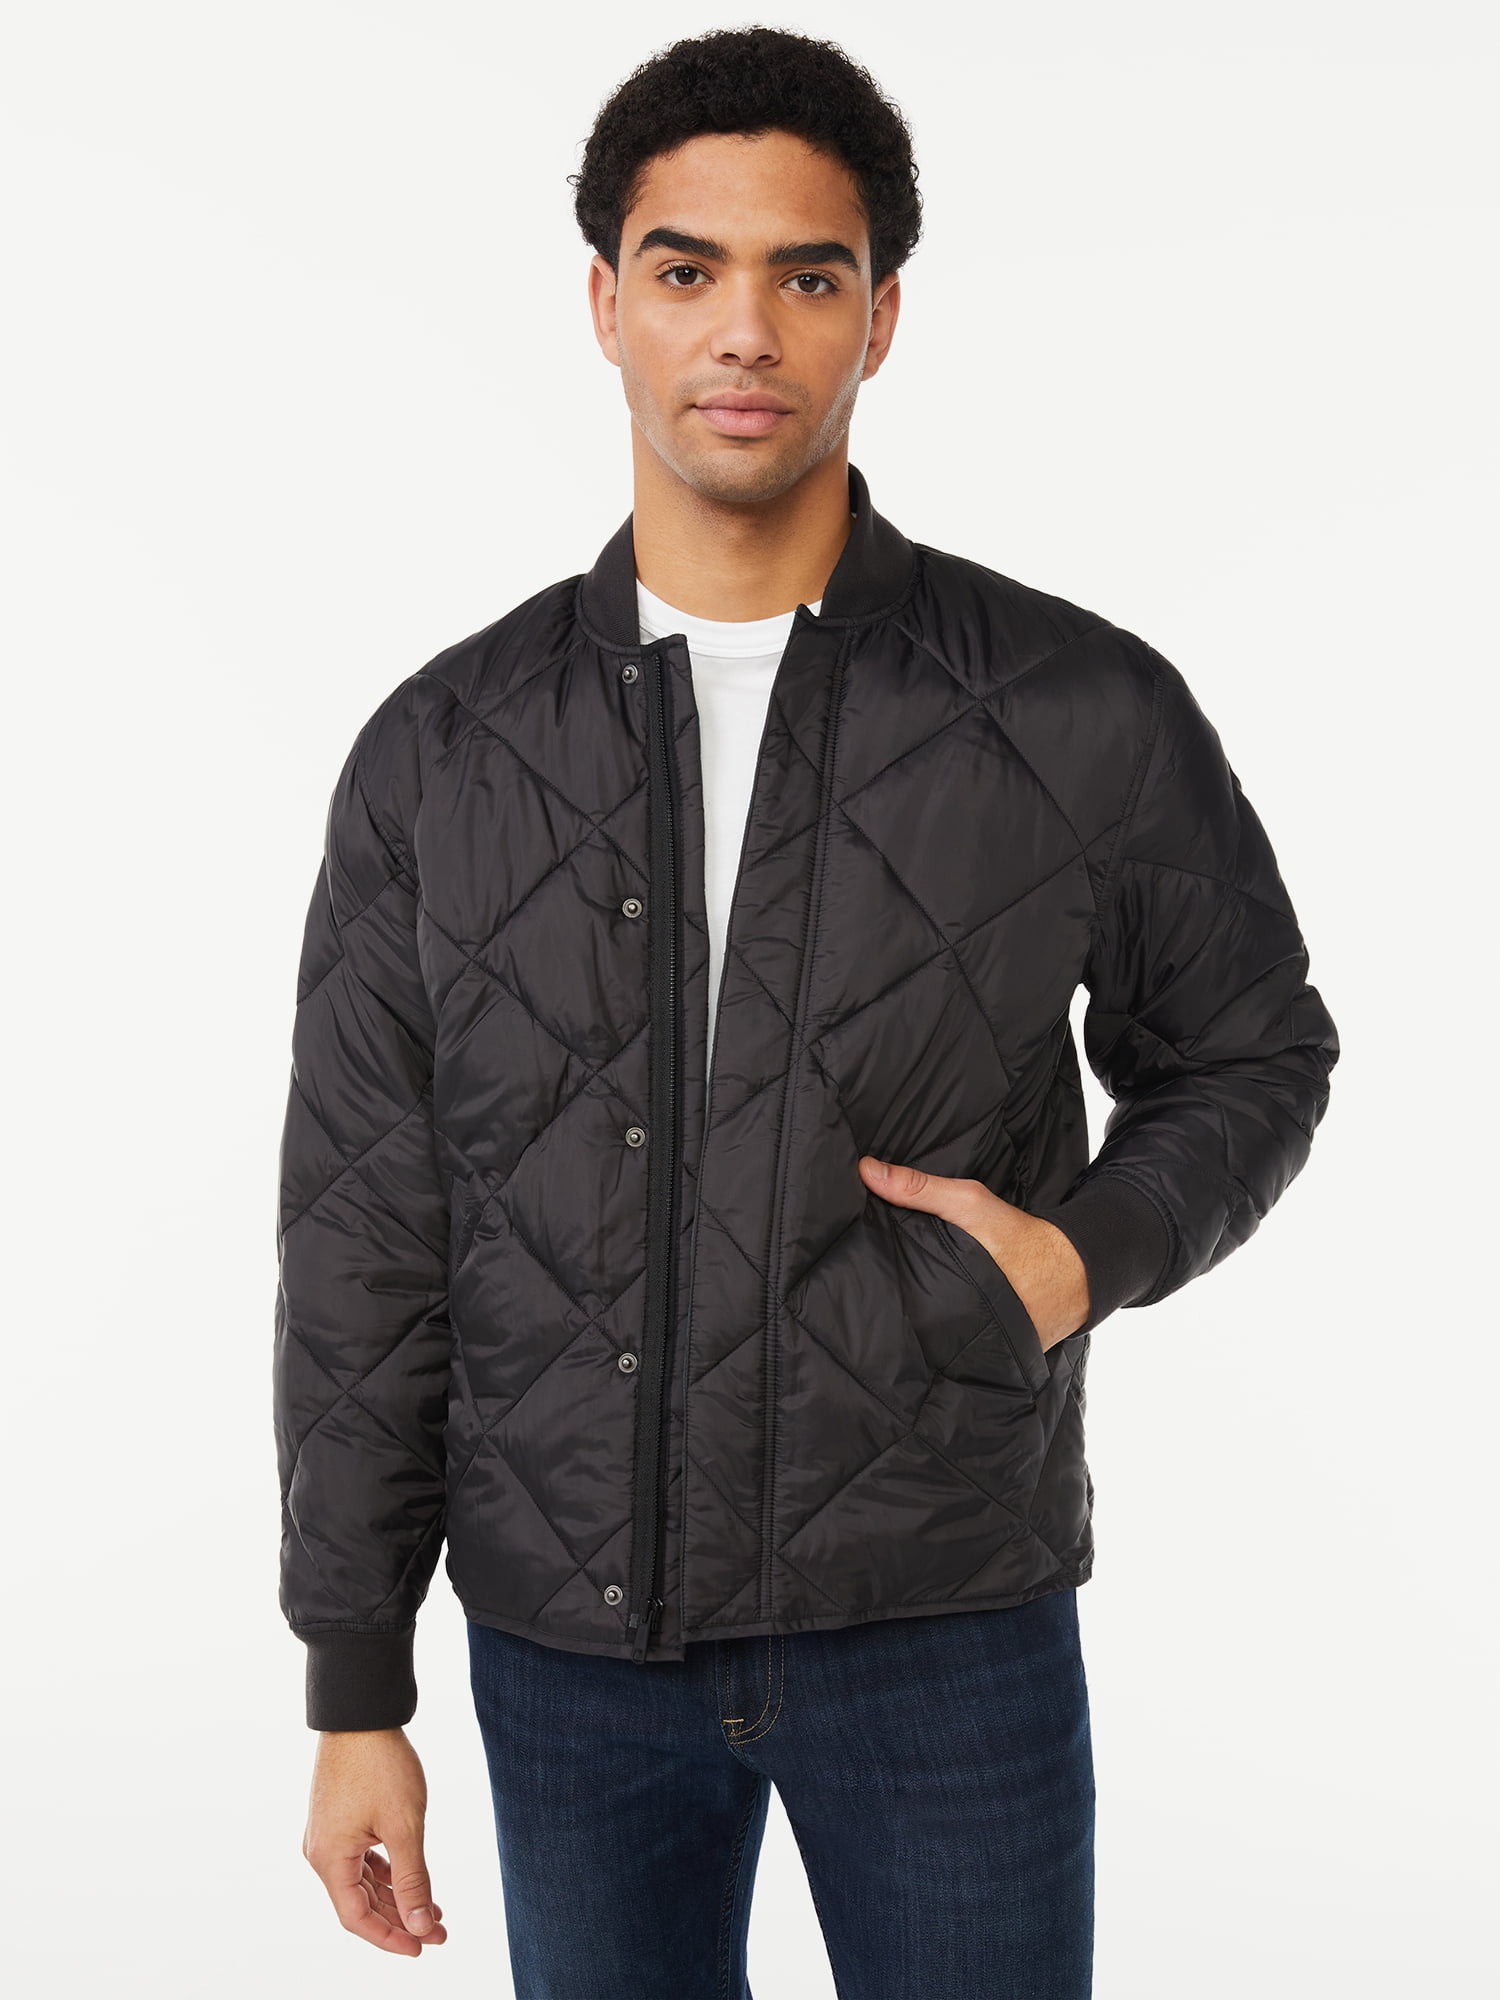 Free Assembly Men's Diamond Quilted Bomber Jacket - Walmart.com